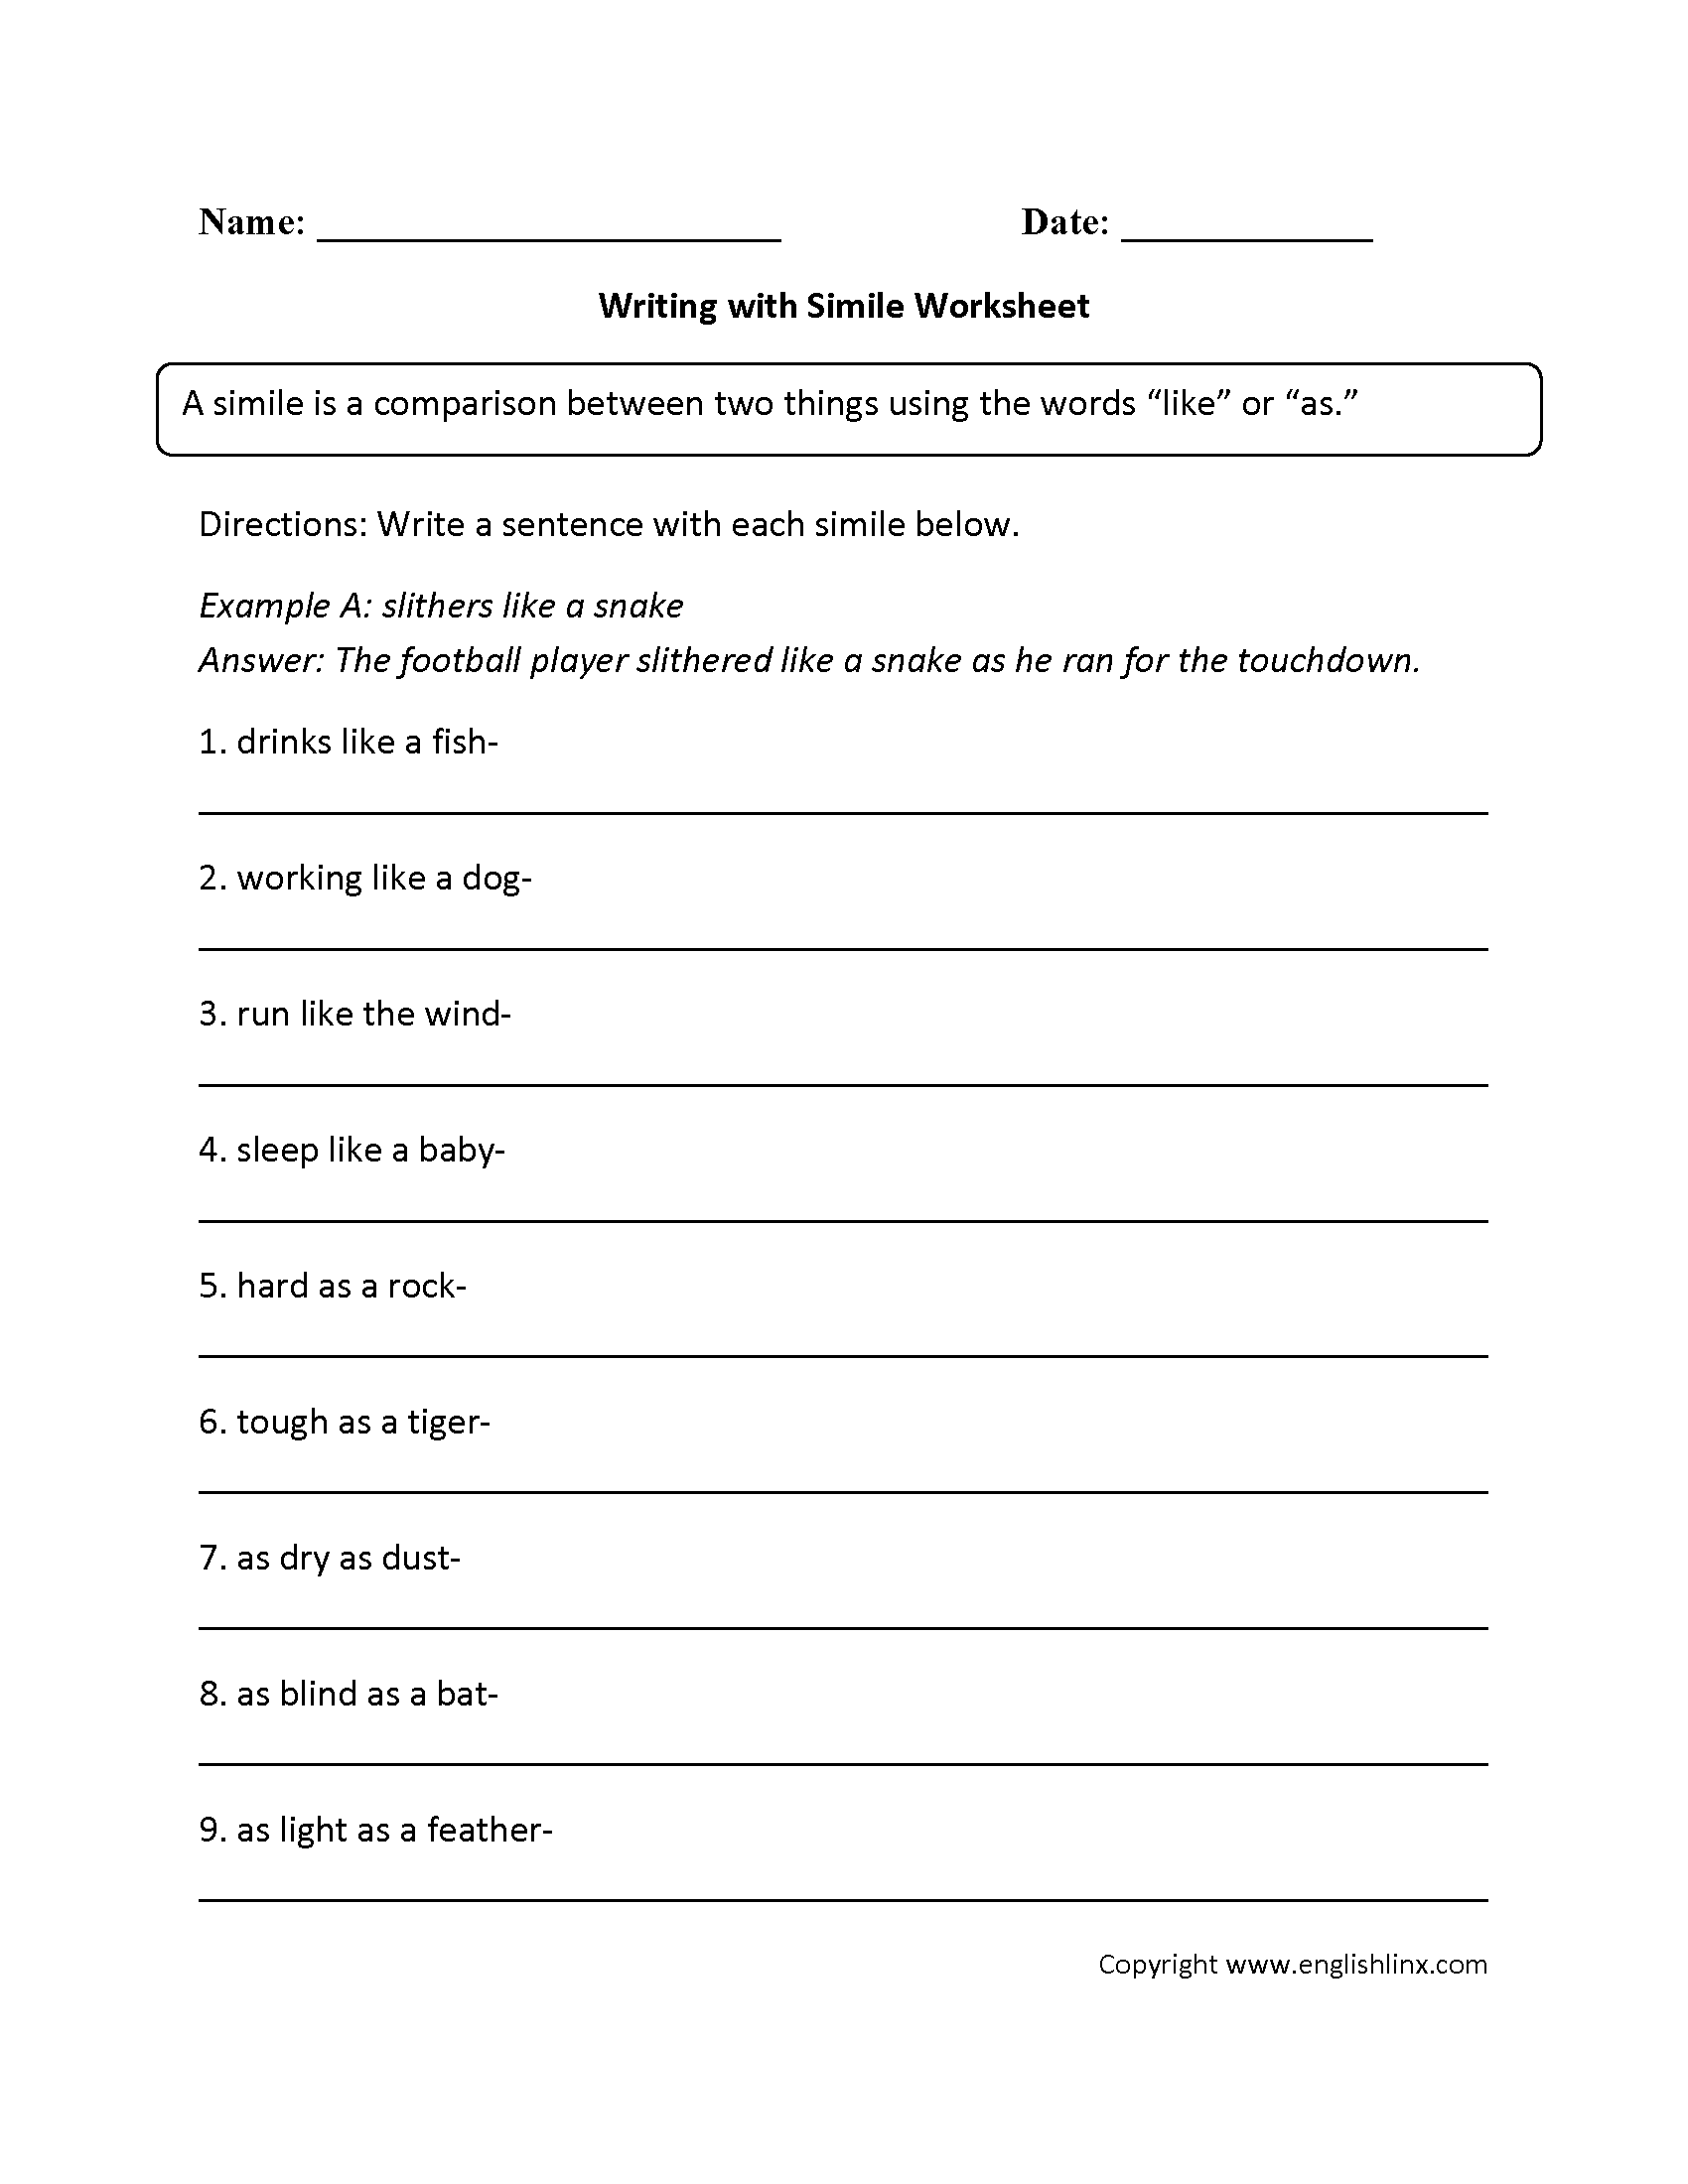 Writing with Similes Worksheet